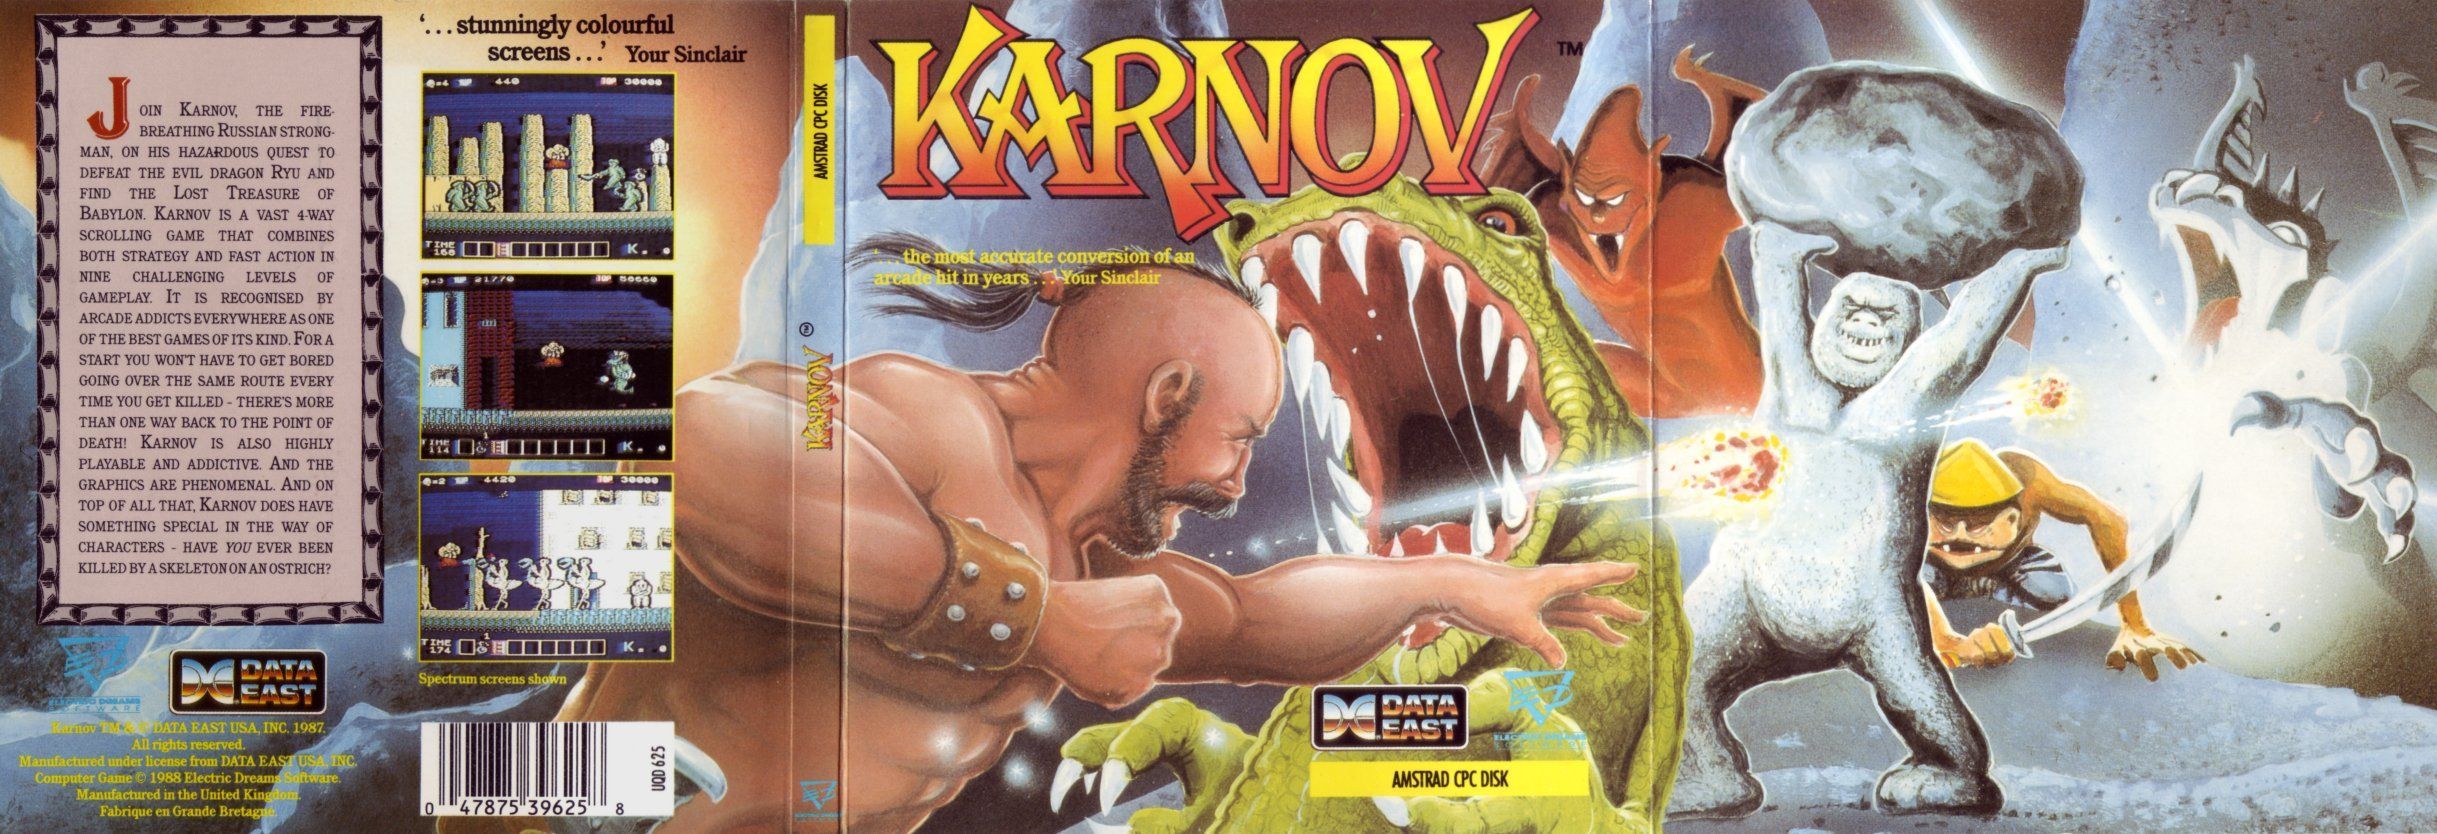 cover of the Amstrad CPC game karnov by Mig